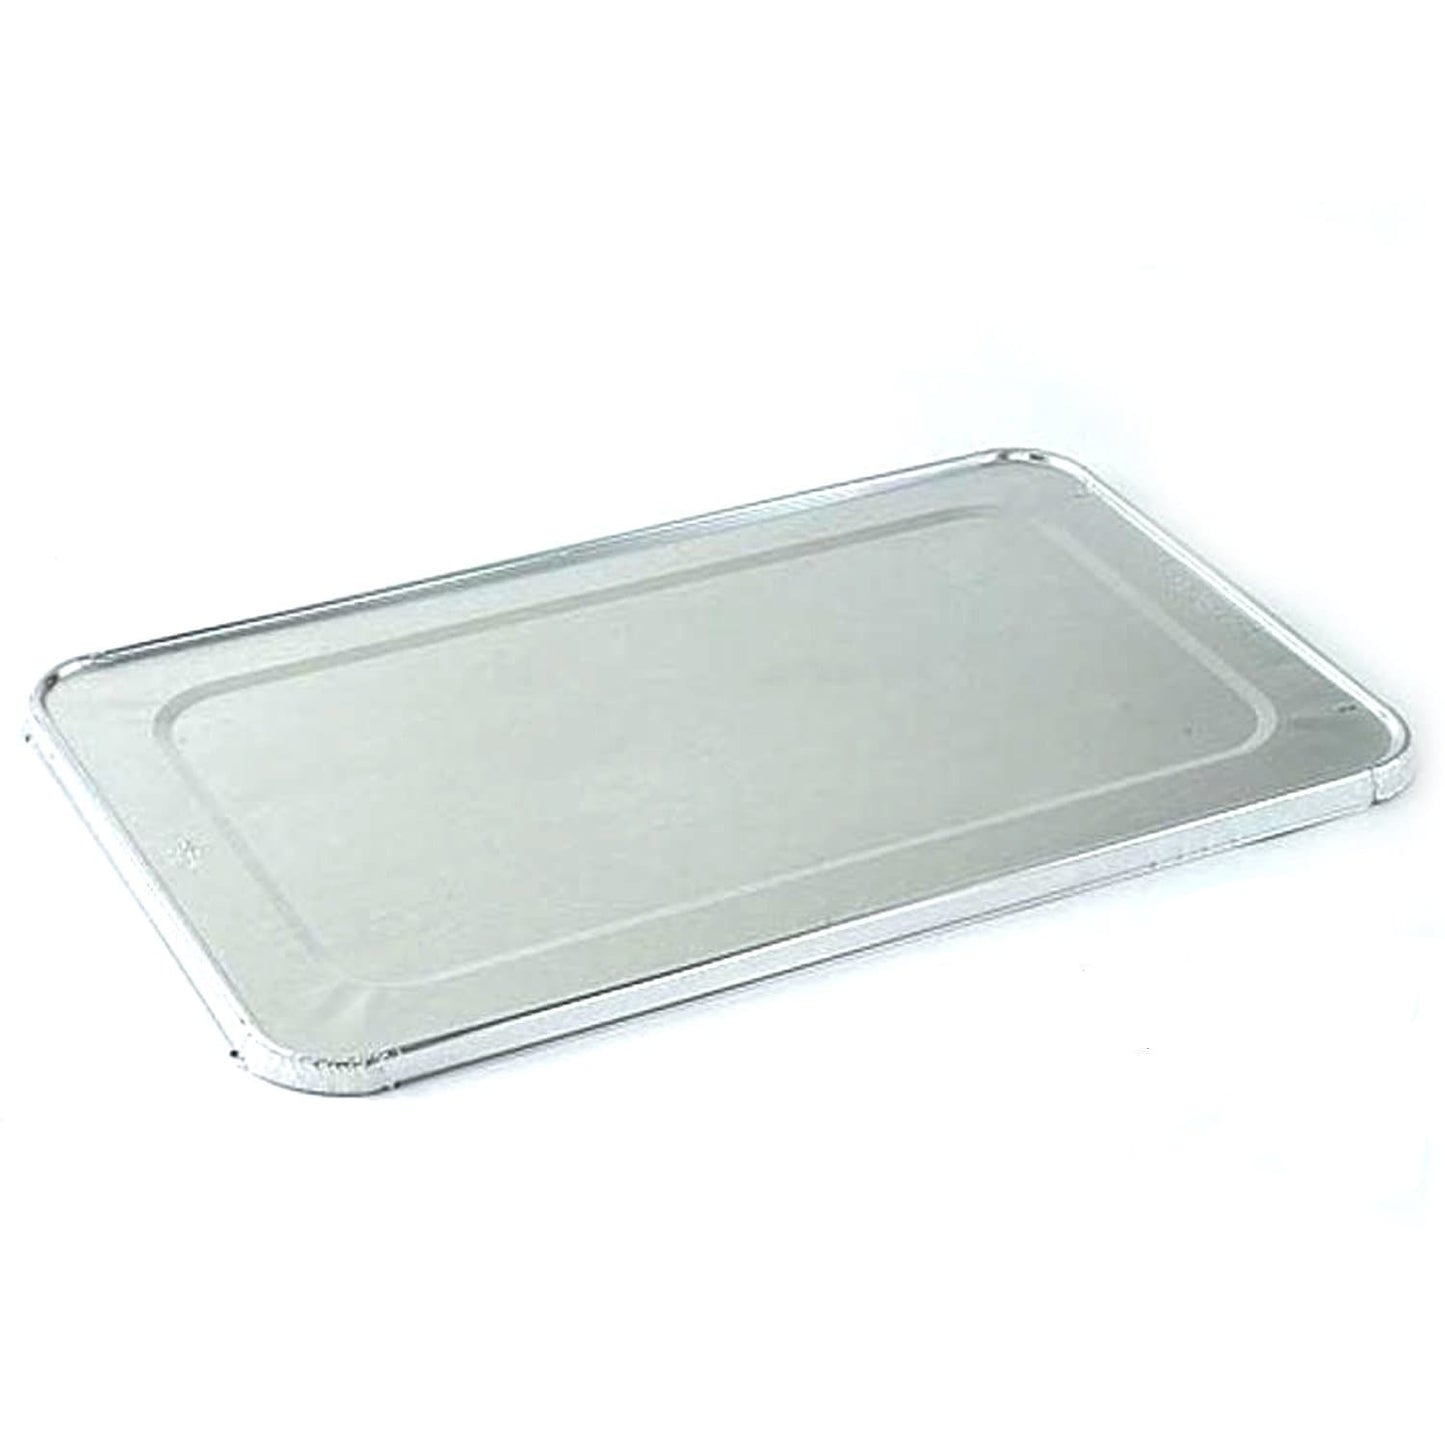 Full Sized Disposable Aluminum Lid for Deep Roster 20.75" X 12.75" X 1.2" Disposable VeZee   